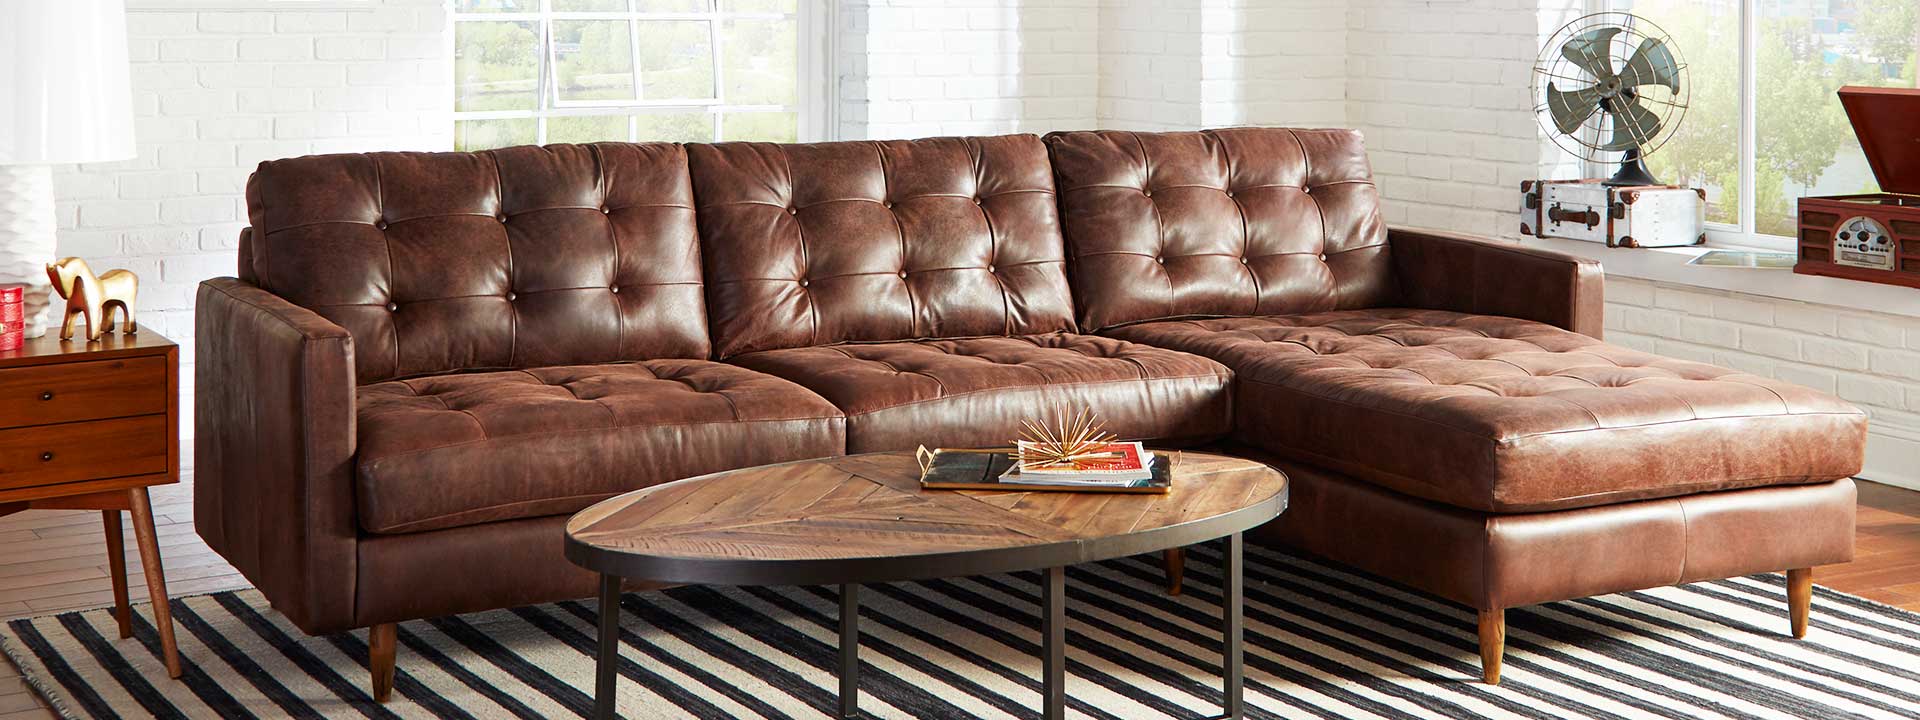 Texas Leather Furniture & Accessories's Logo